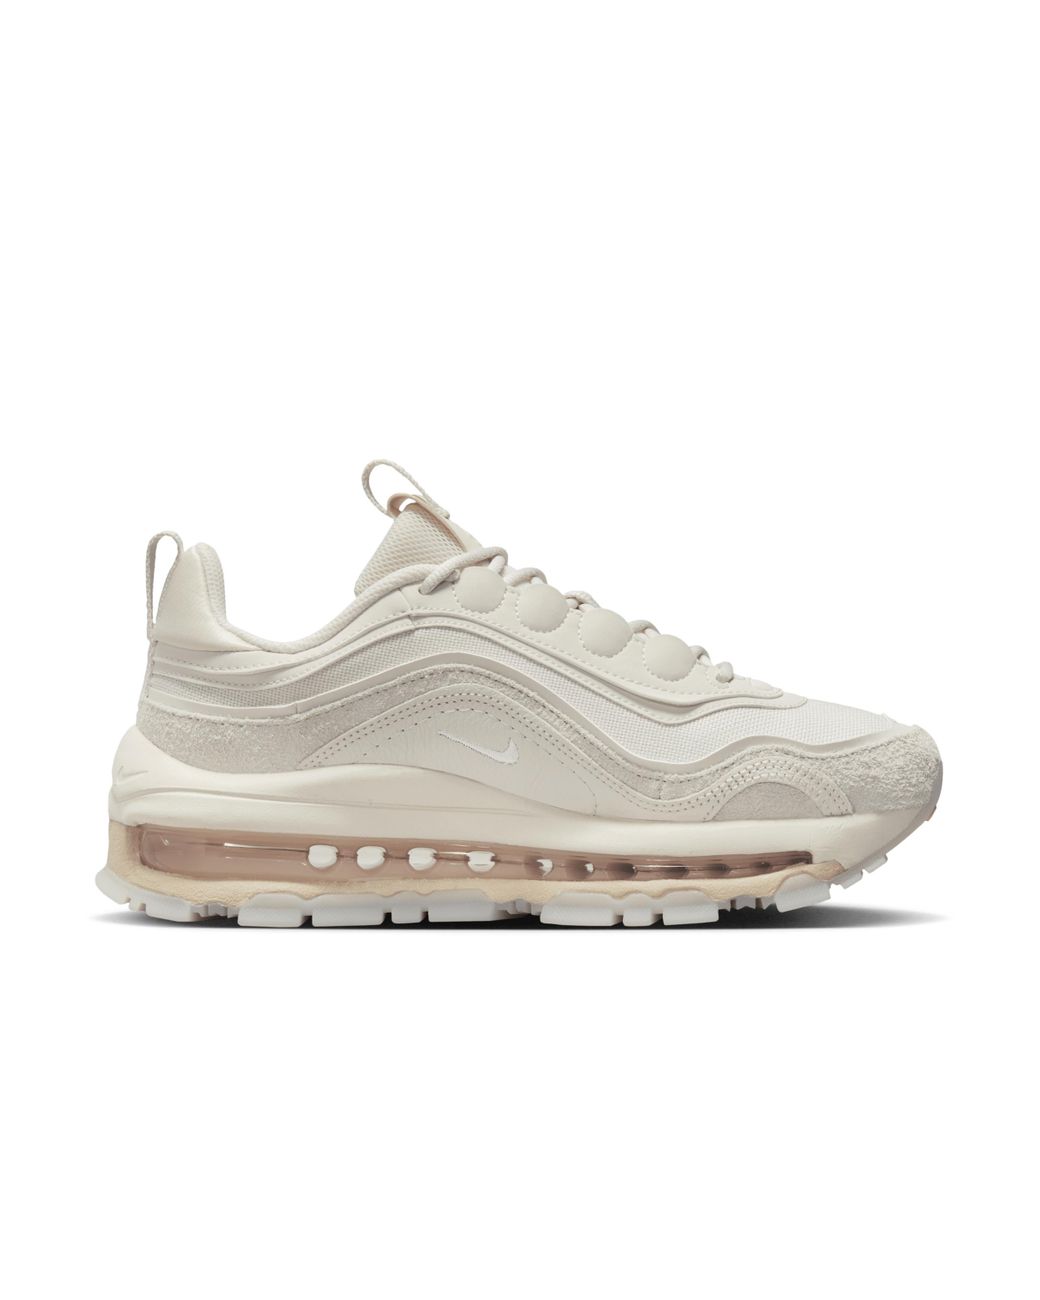 Nike Air Max 97 Futura Shoes in White | Lyst UK